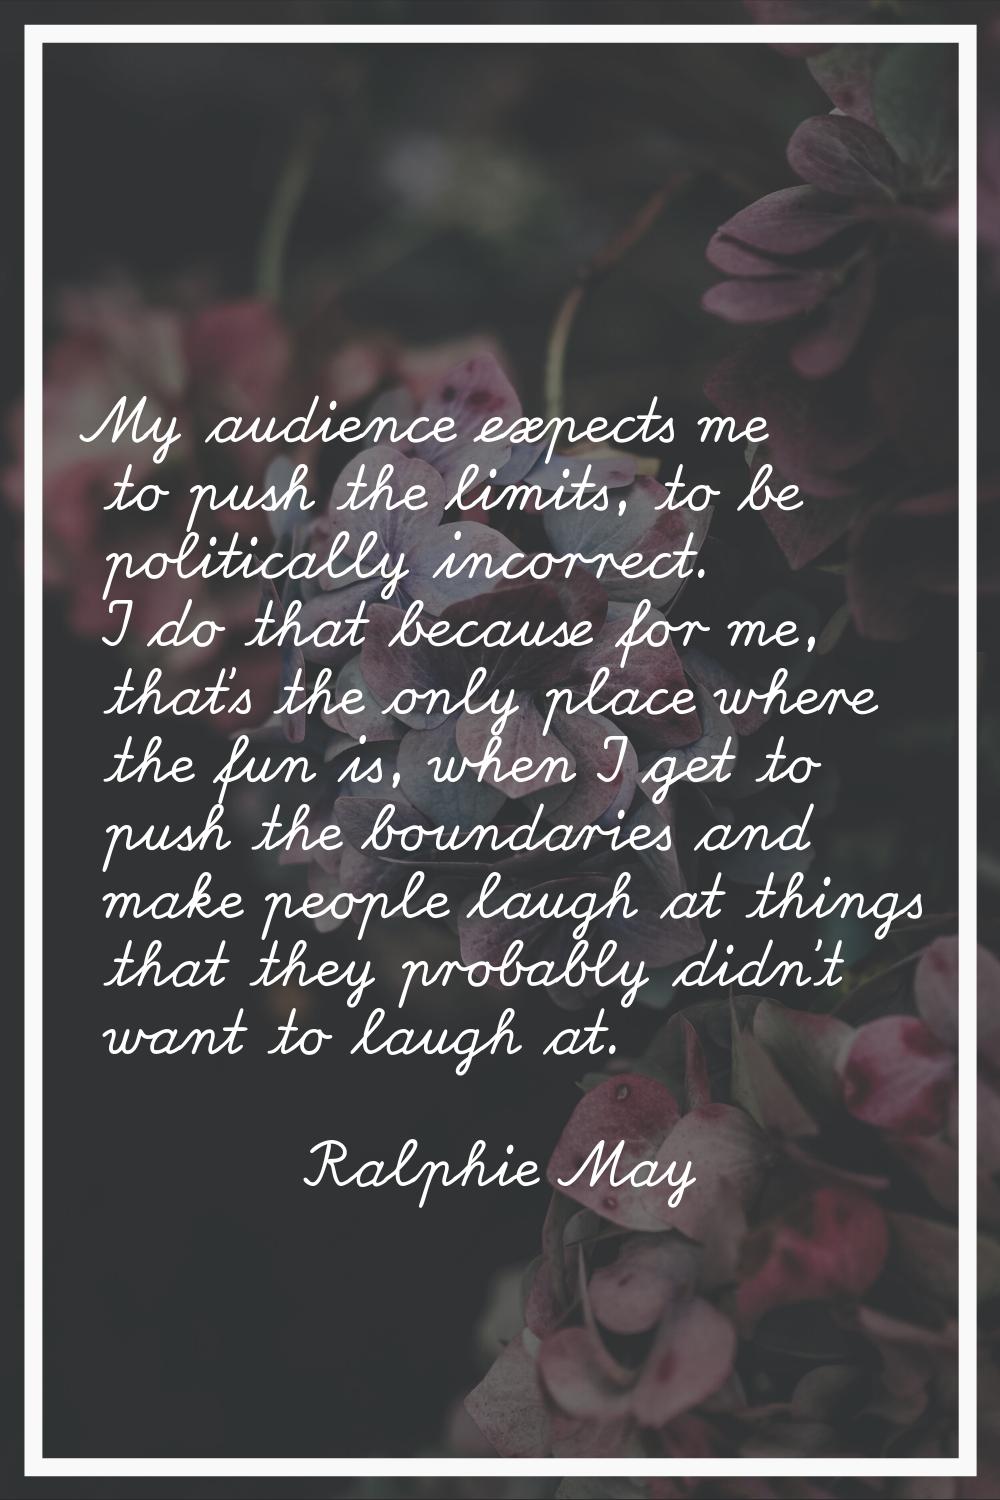 My audience expects me to push the limits, to be politically incorrect. I do that because for me, t